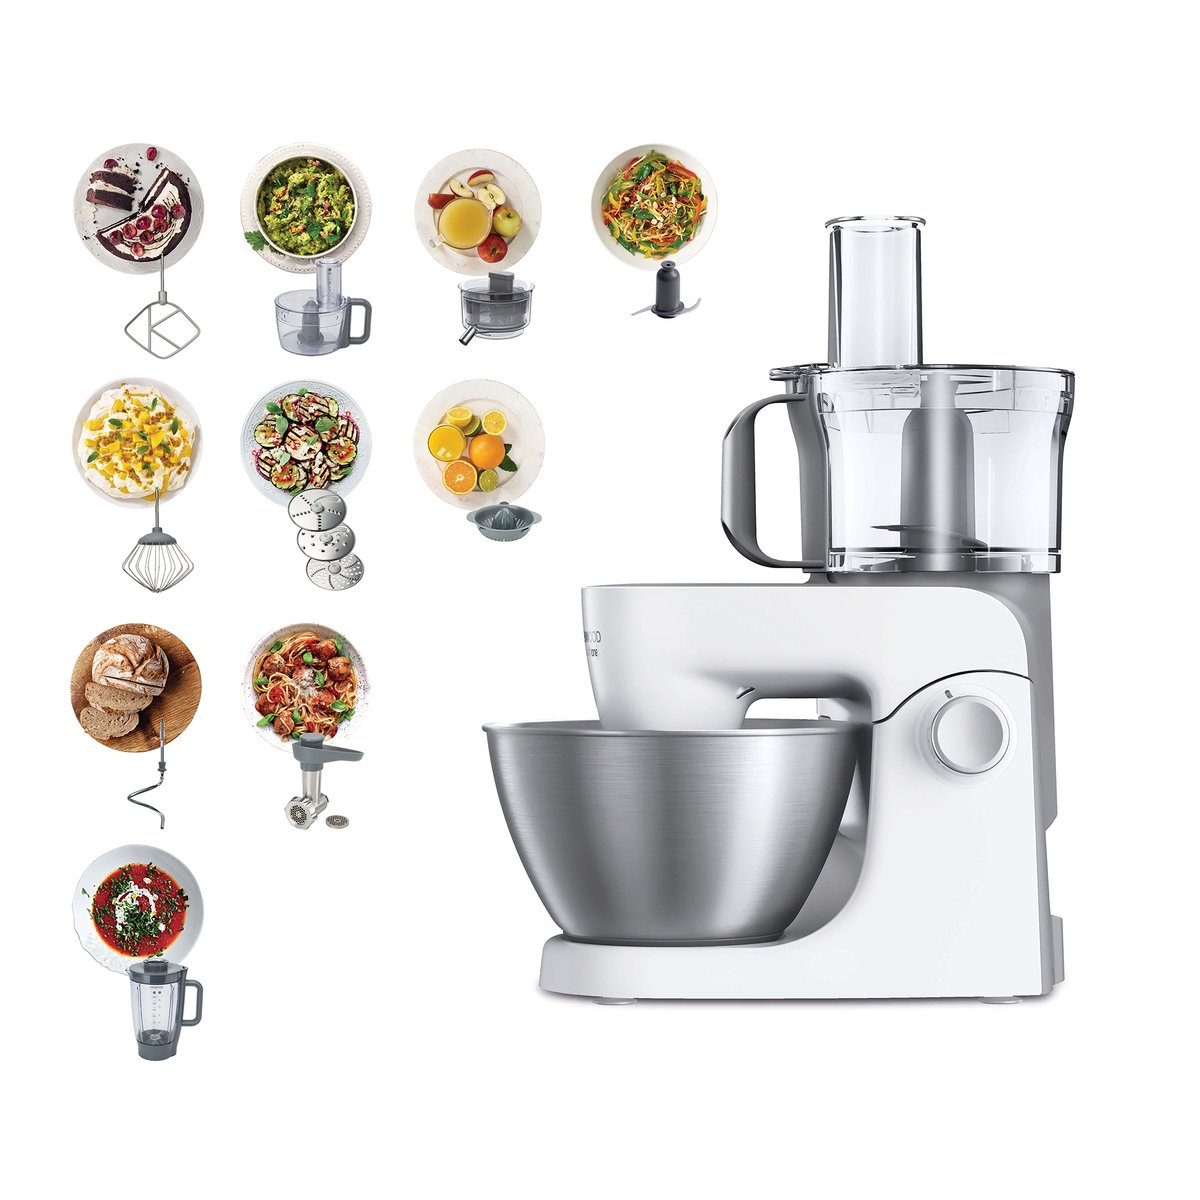 Kenwood Food Processor 1000W Multi-Functional with 3 Stainless Steel Disks,  Blender, Grinder Mill, Juicer Extractor, Whisk, Dough Maker, Citrus Juicer  FDP65.750WH White Online at Best Price, Food Processors